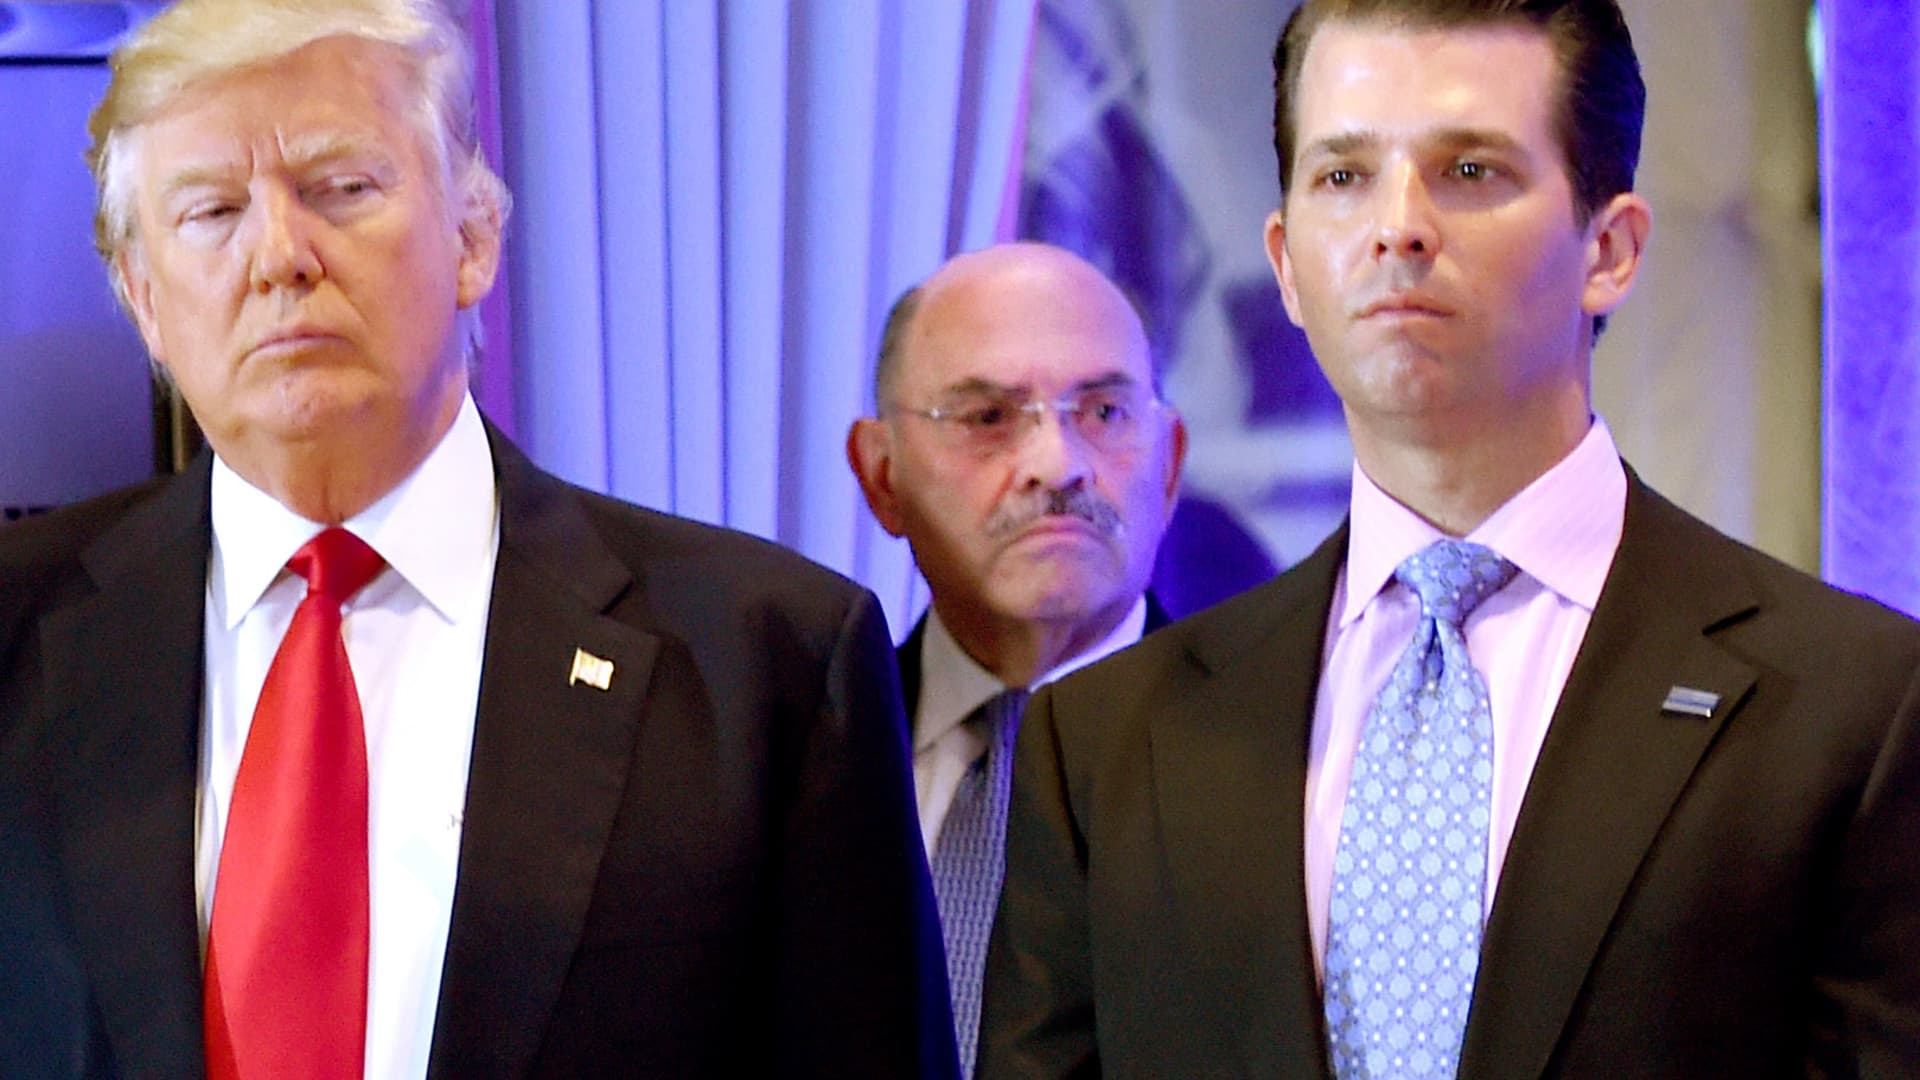 US President-elect Donald Trump along with his son Donald, Jr., arrive for a press conference at Trump Tower in New York, as Allen Weisselberg (C), chief financial officer of The Trump, looks on.